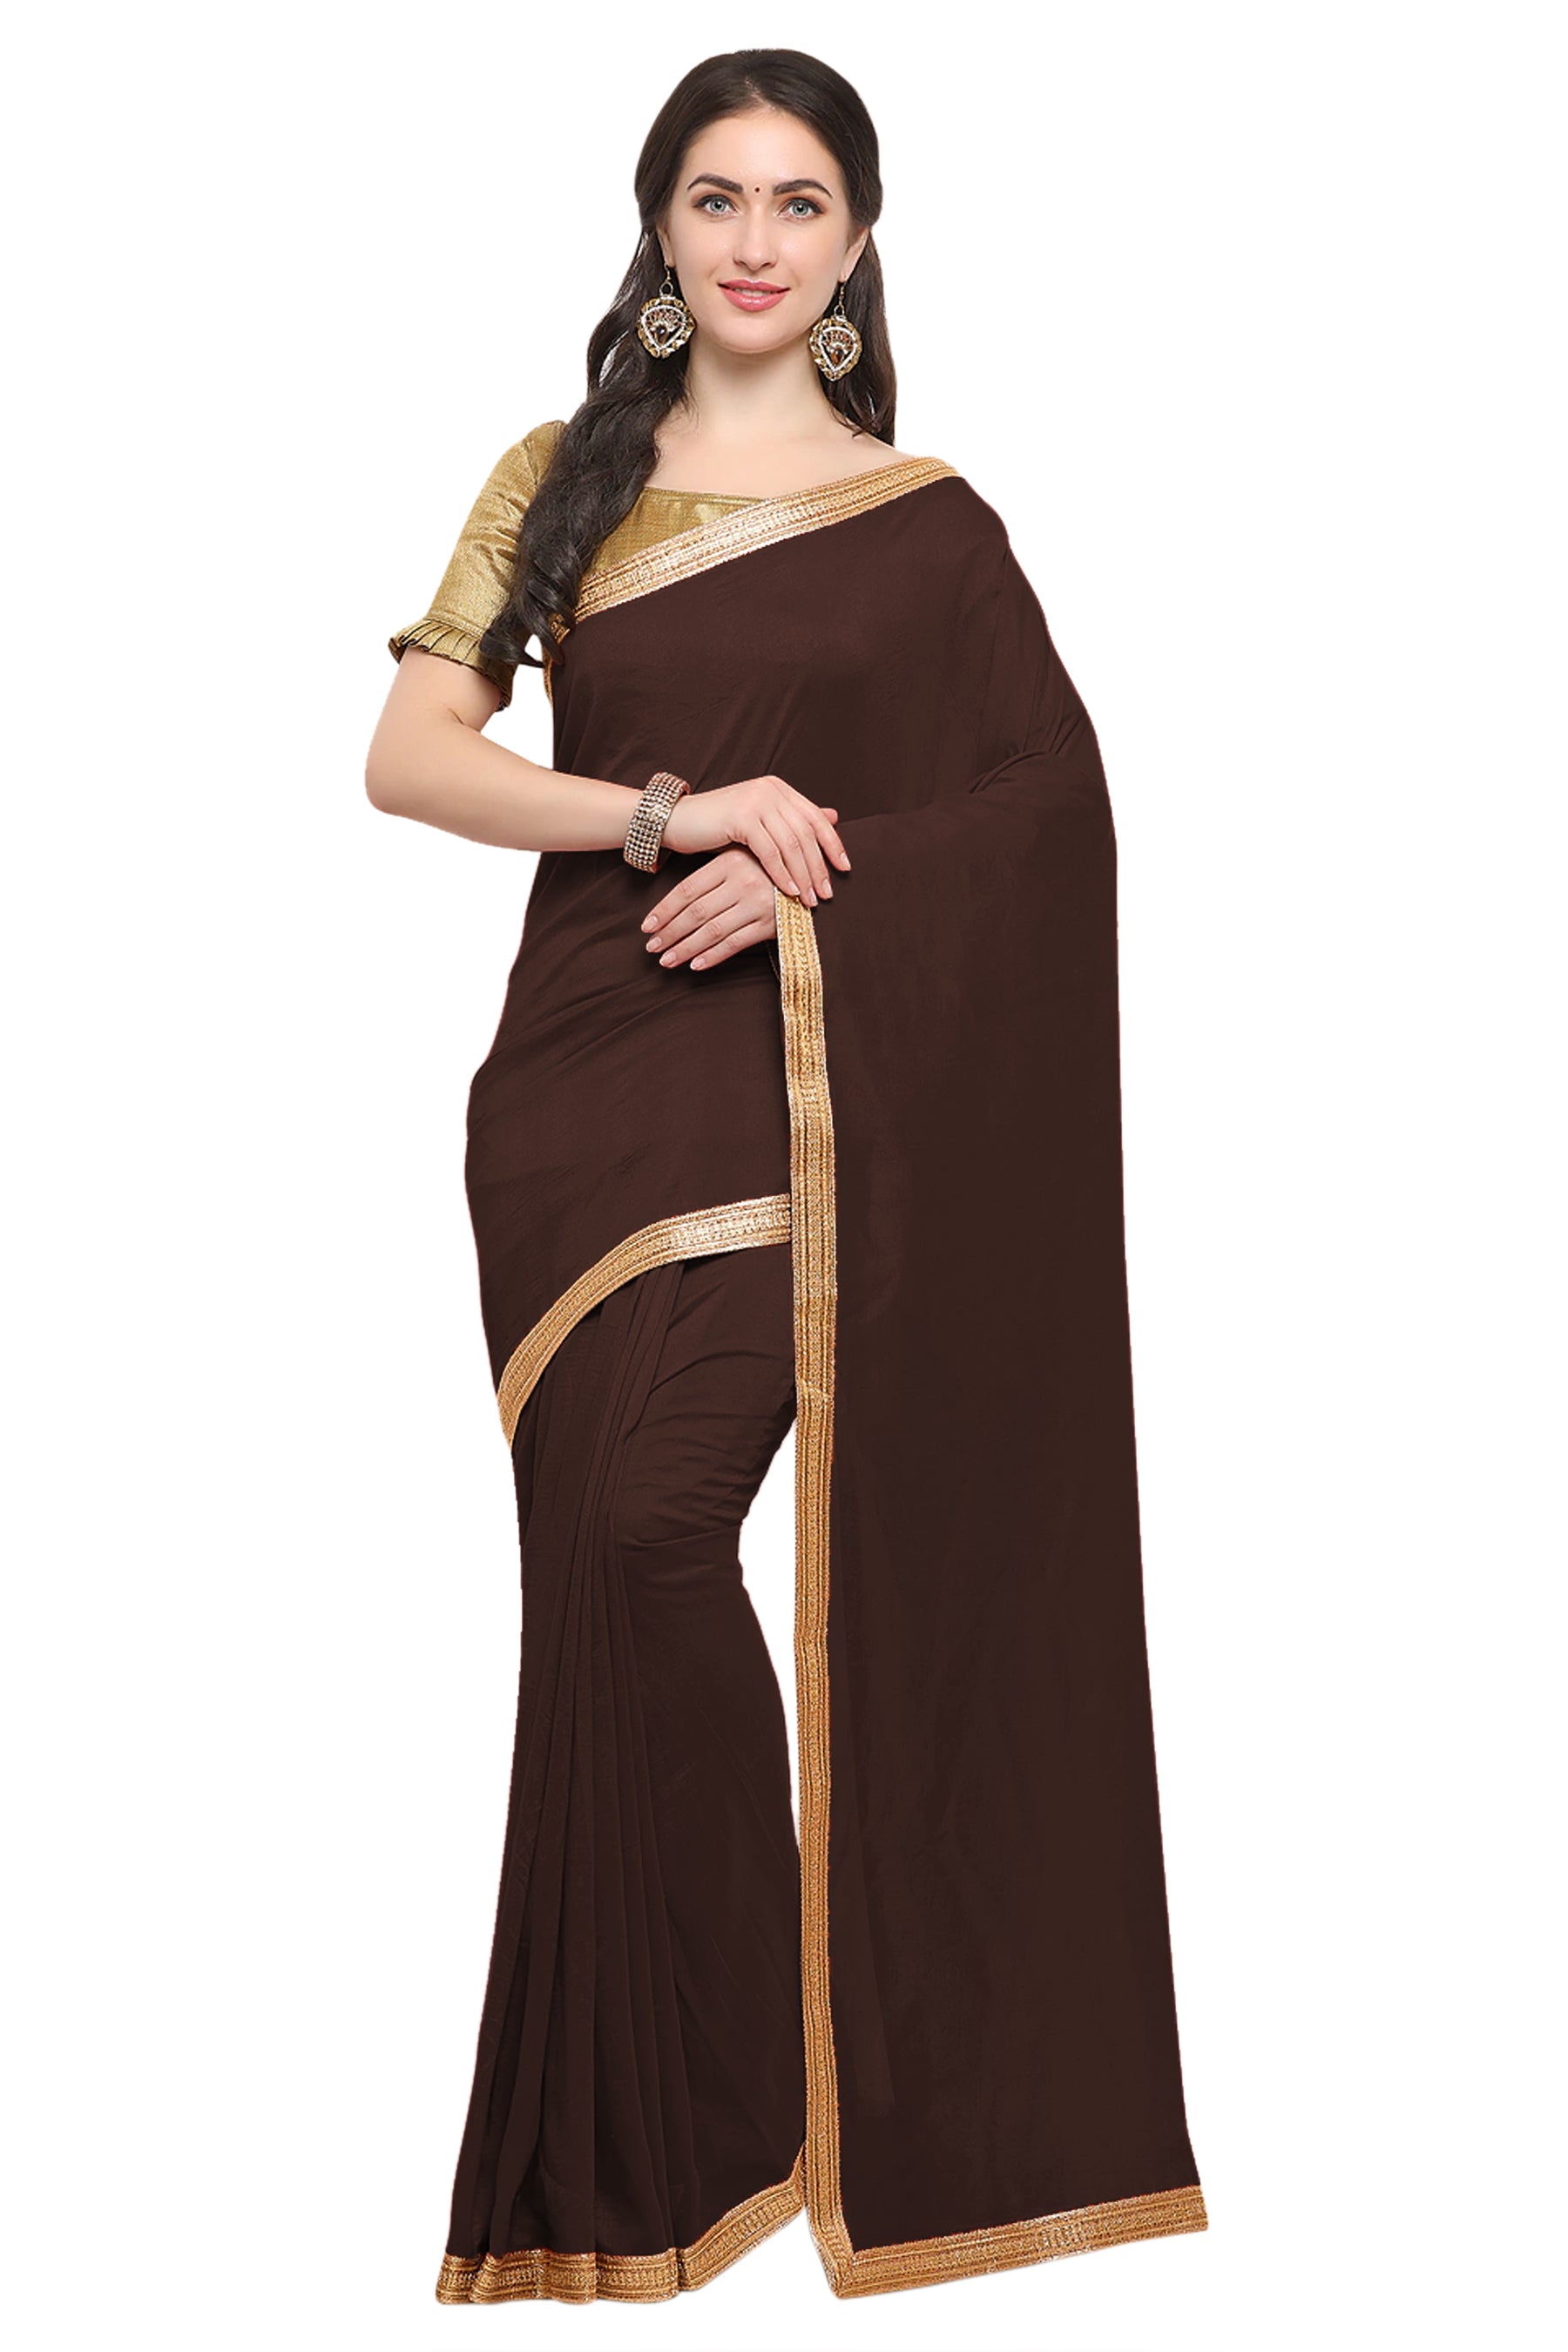 Women's self Woven Solid Occasion Wear Georgette Heavy Border Sari With Blouse Piece (Brown) - NIMIDHYA